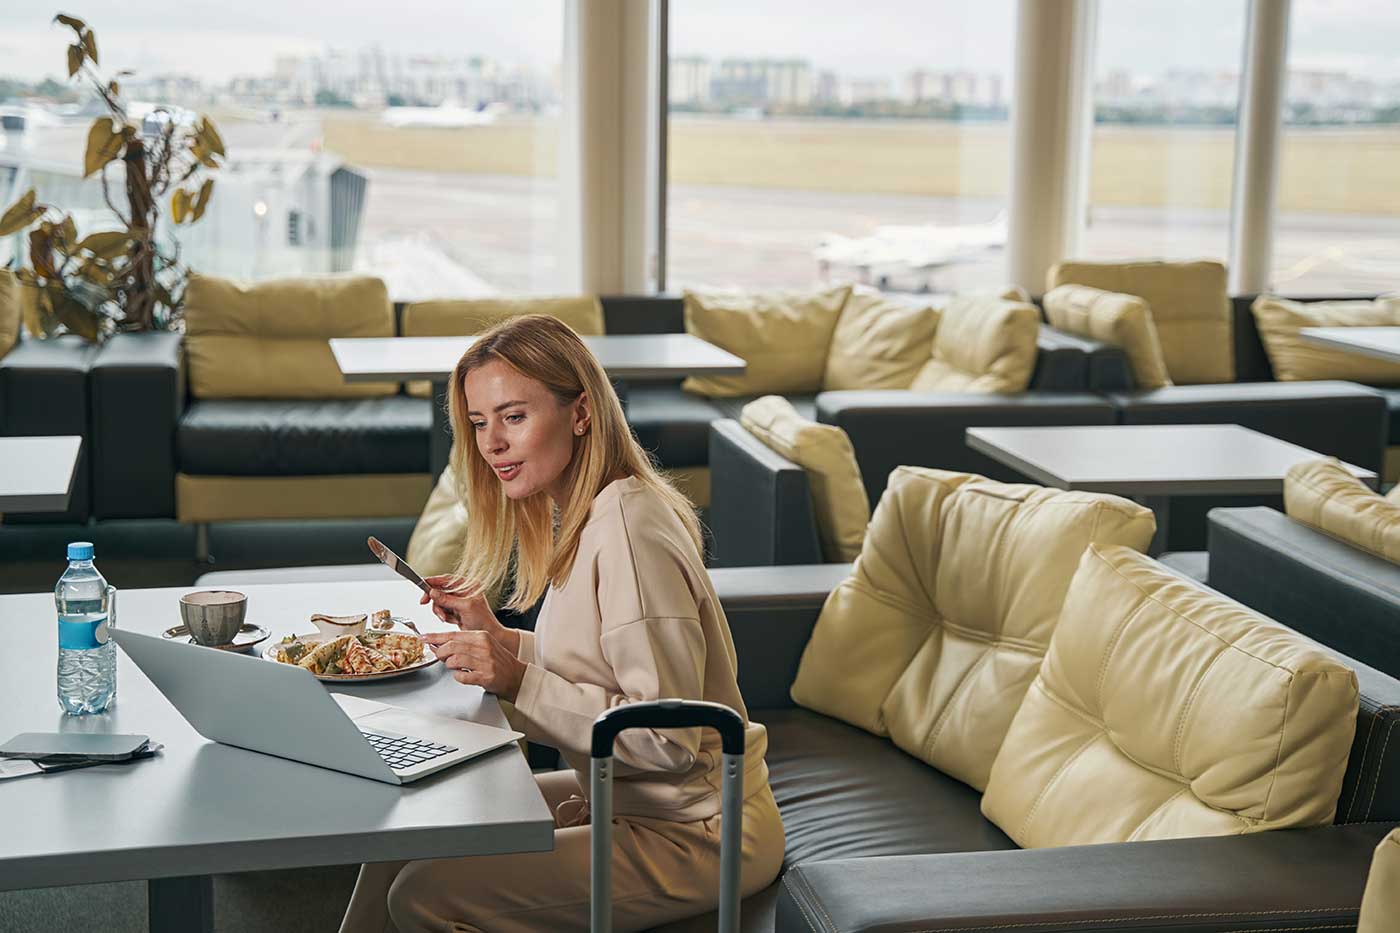 Say Goodbye to Travel Stress: A dedicated travel agent like Business First Travel can help you keep your cool by navigating sudden itinerary changes